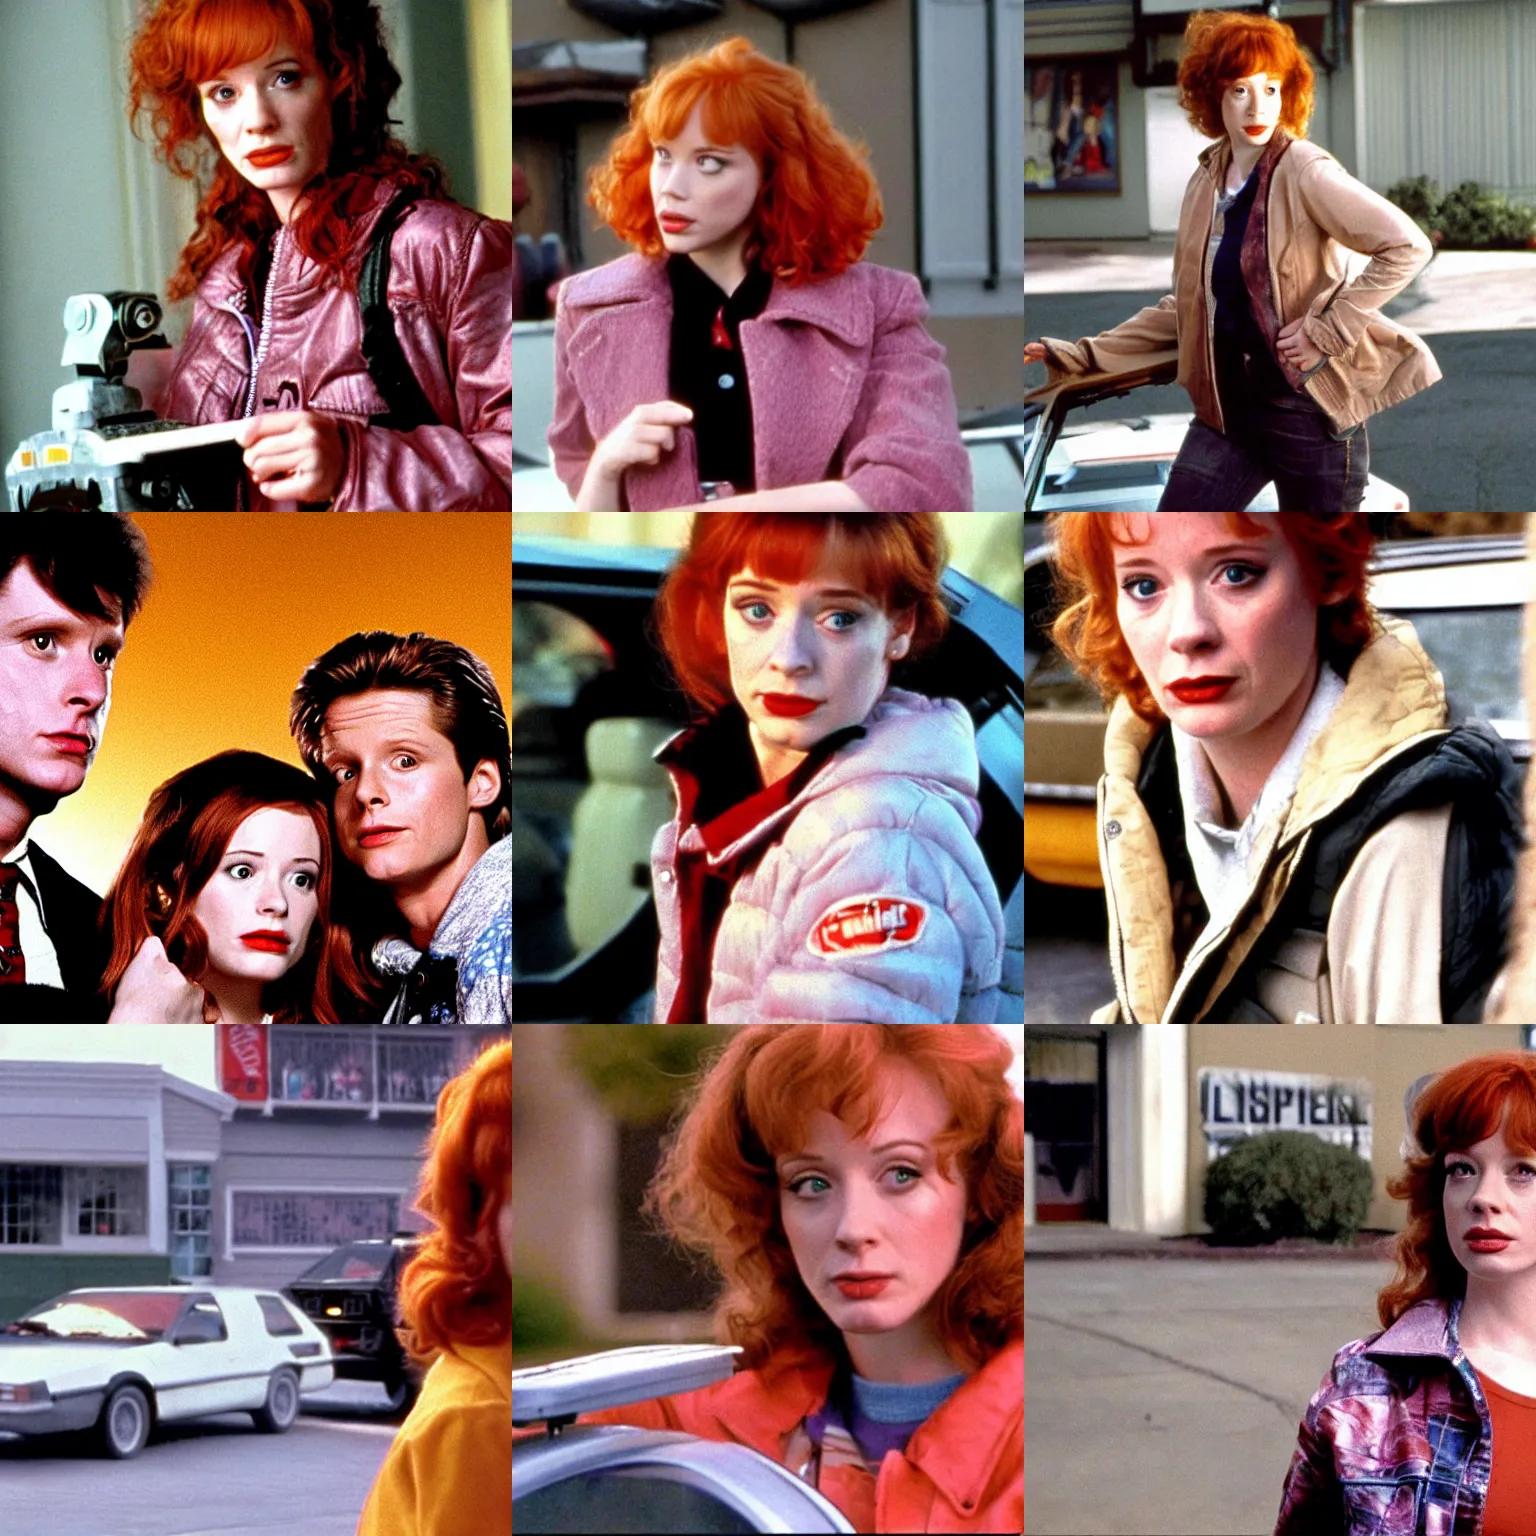 Prompt: female marty mcfly played by christina hendricks, movie still from back to the future